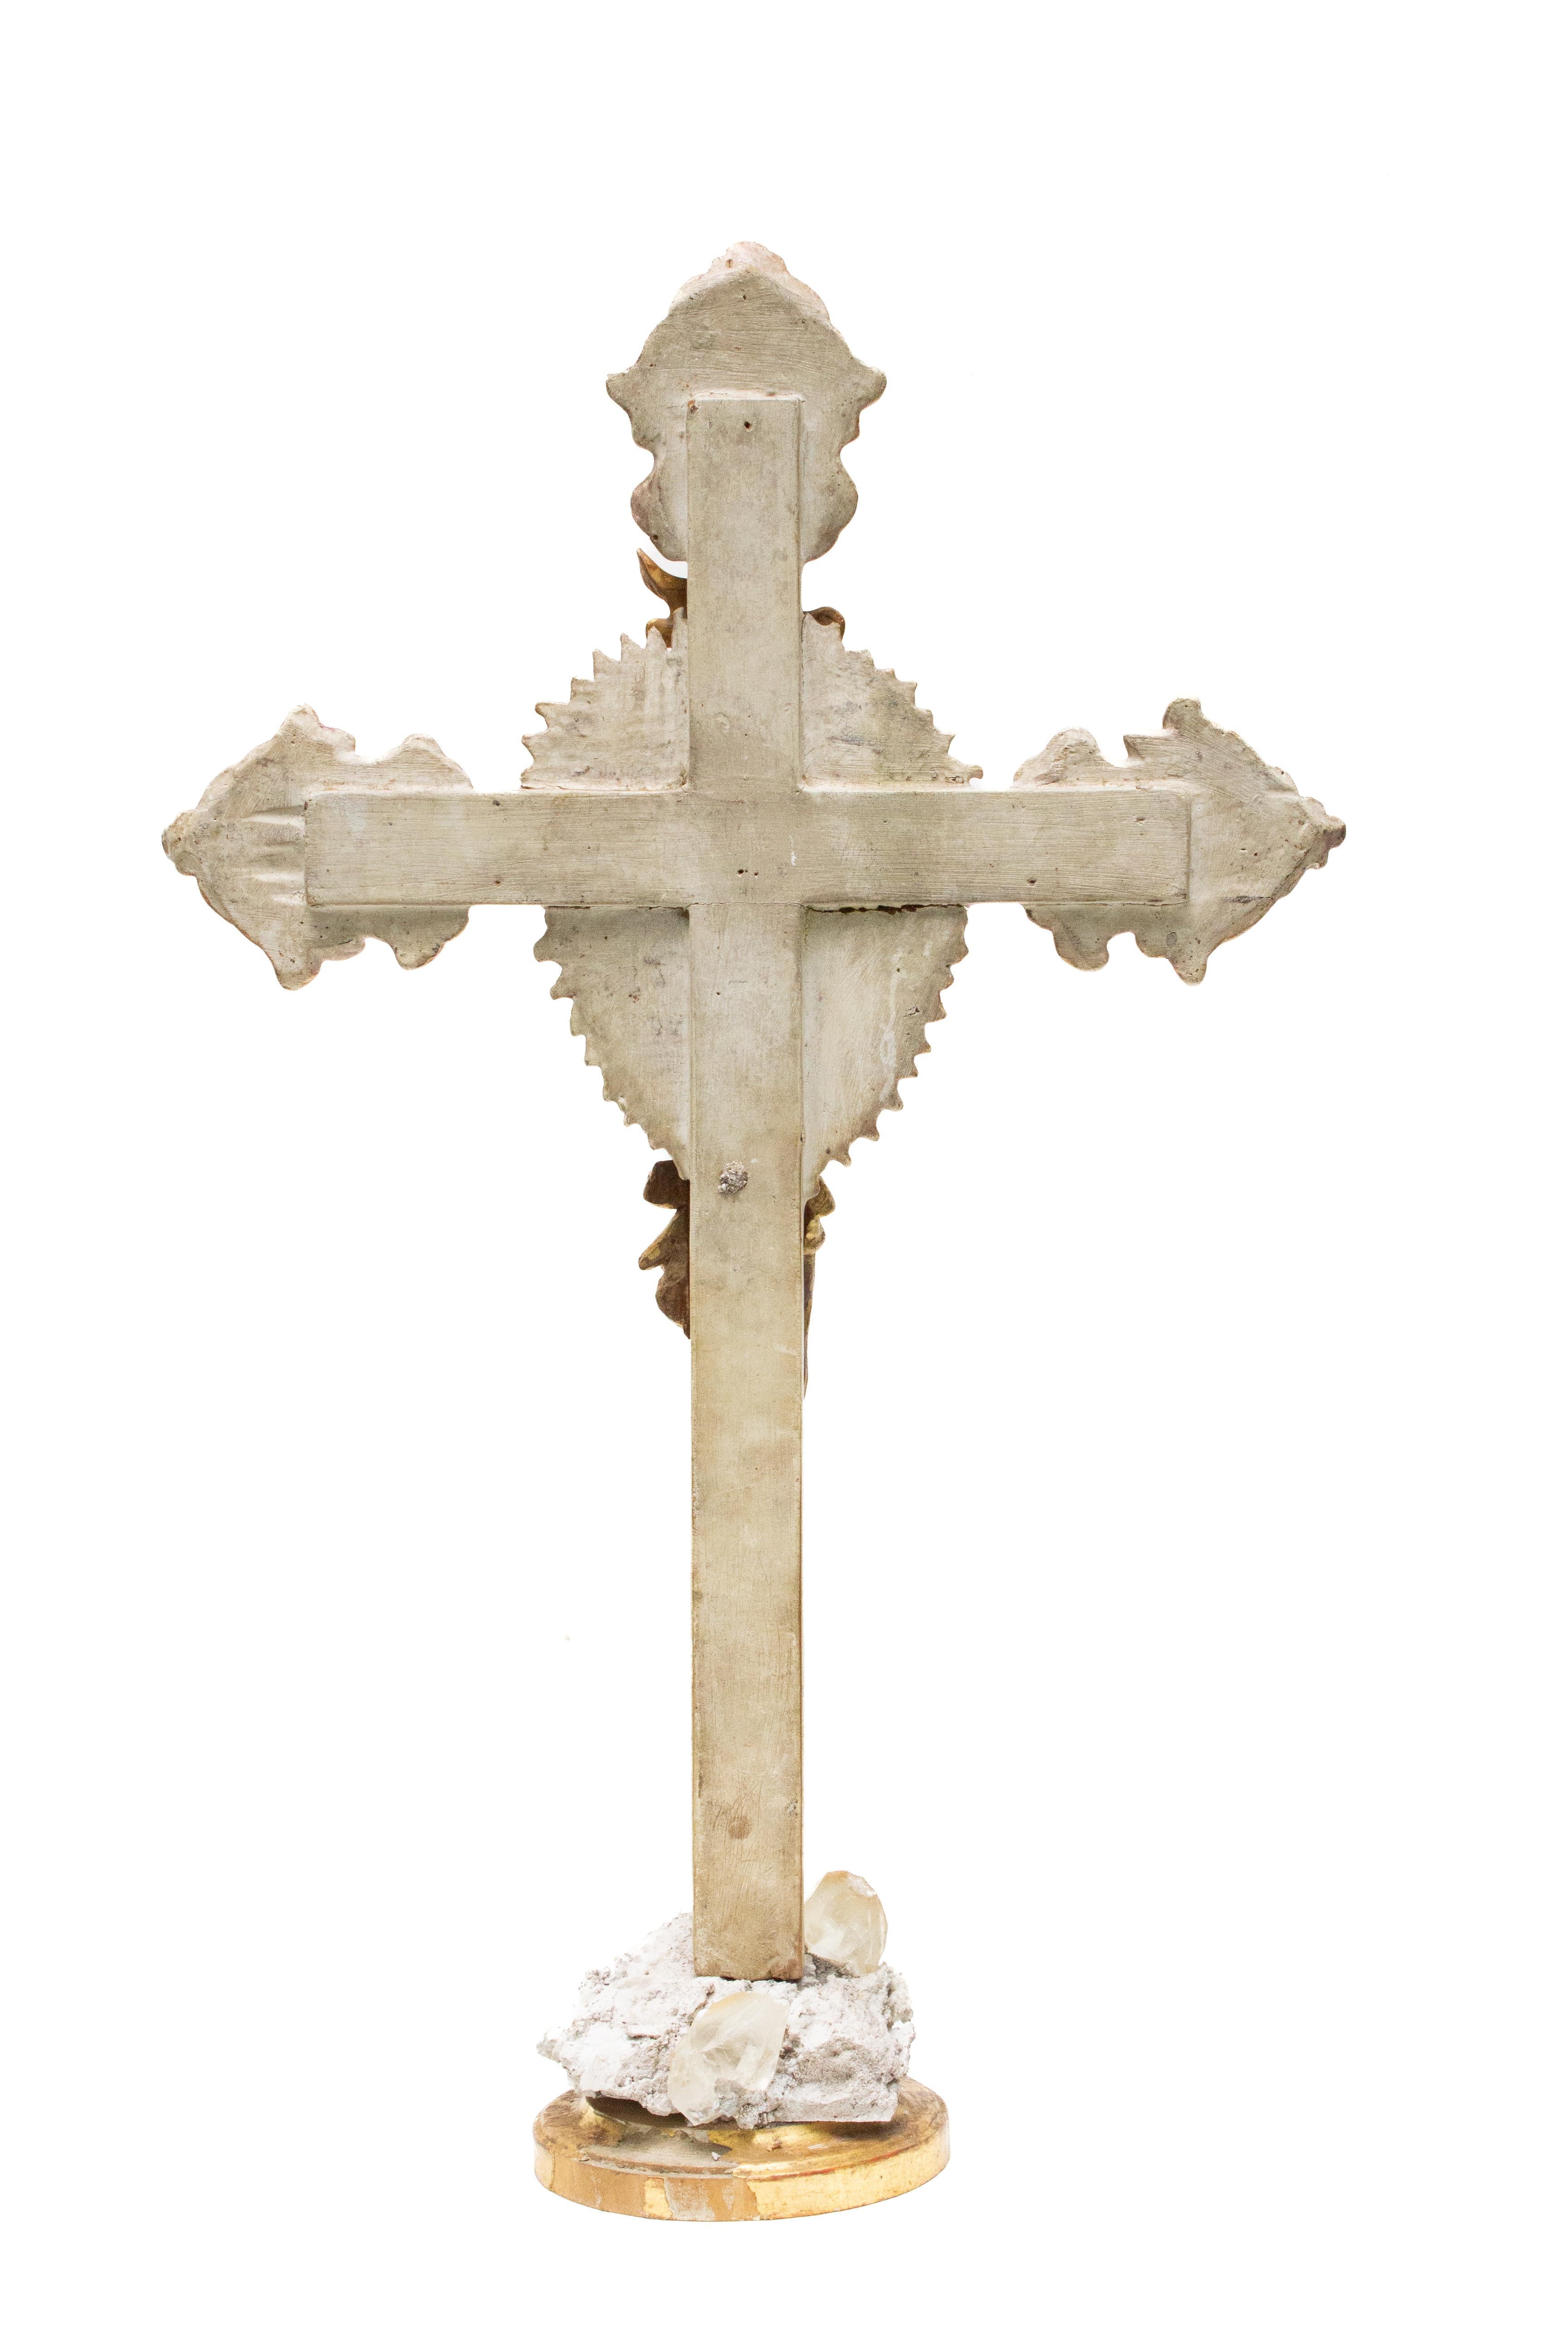 Rock Crystal Sculptural 18th Century Italian Gilded Crucifix with Calcite Crystals For Sale